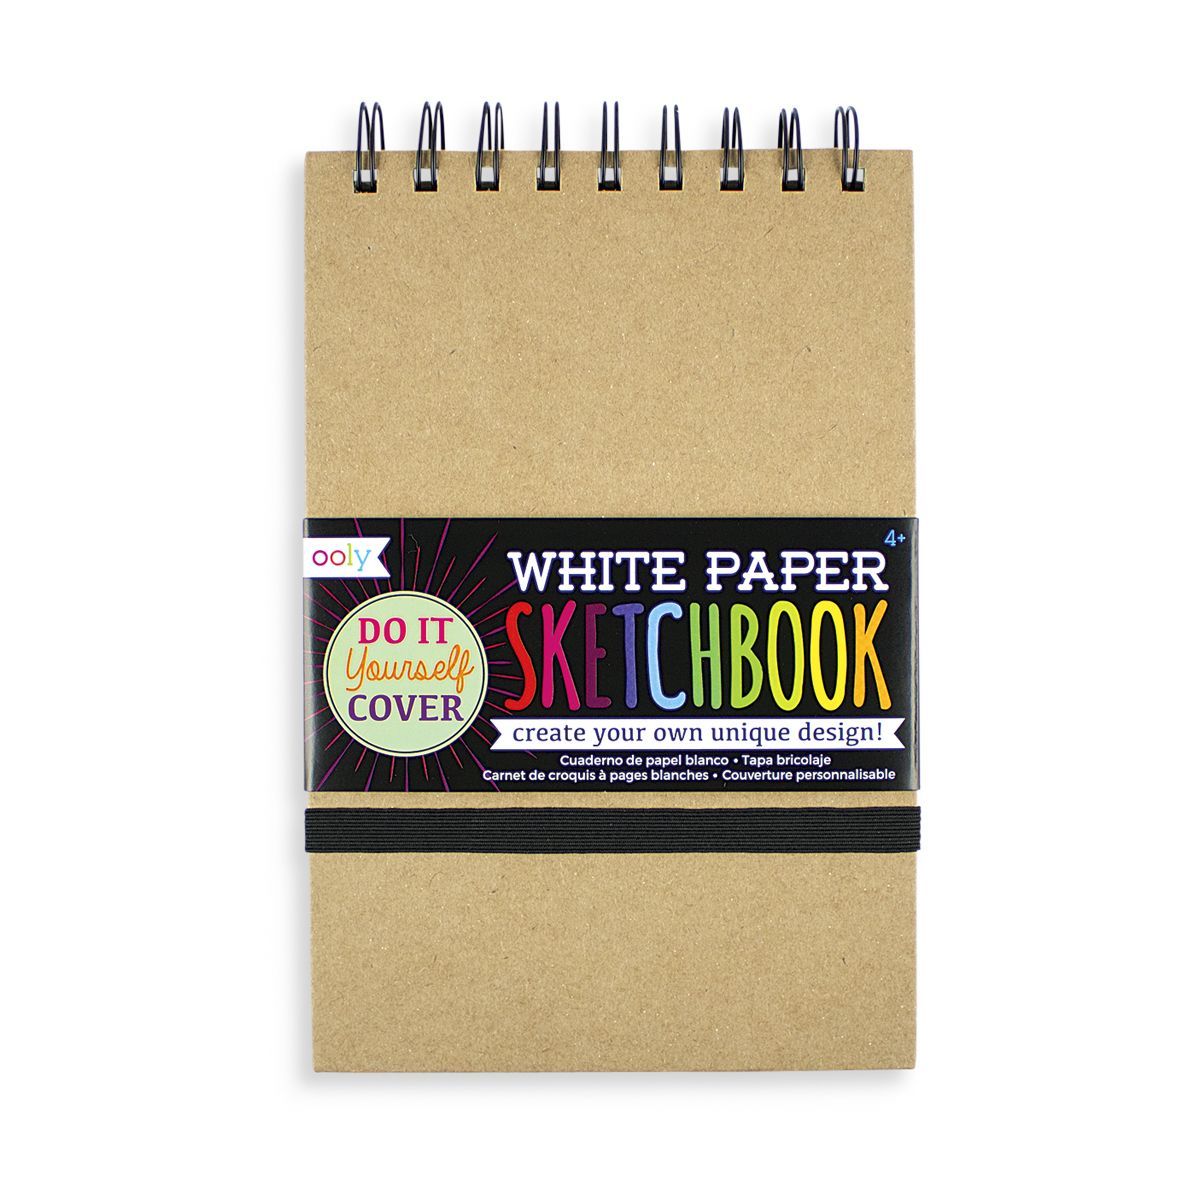 D.I.Y. Sketchbook - Small White